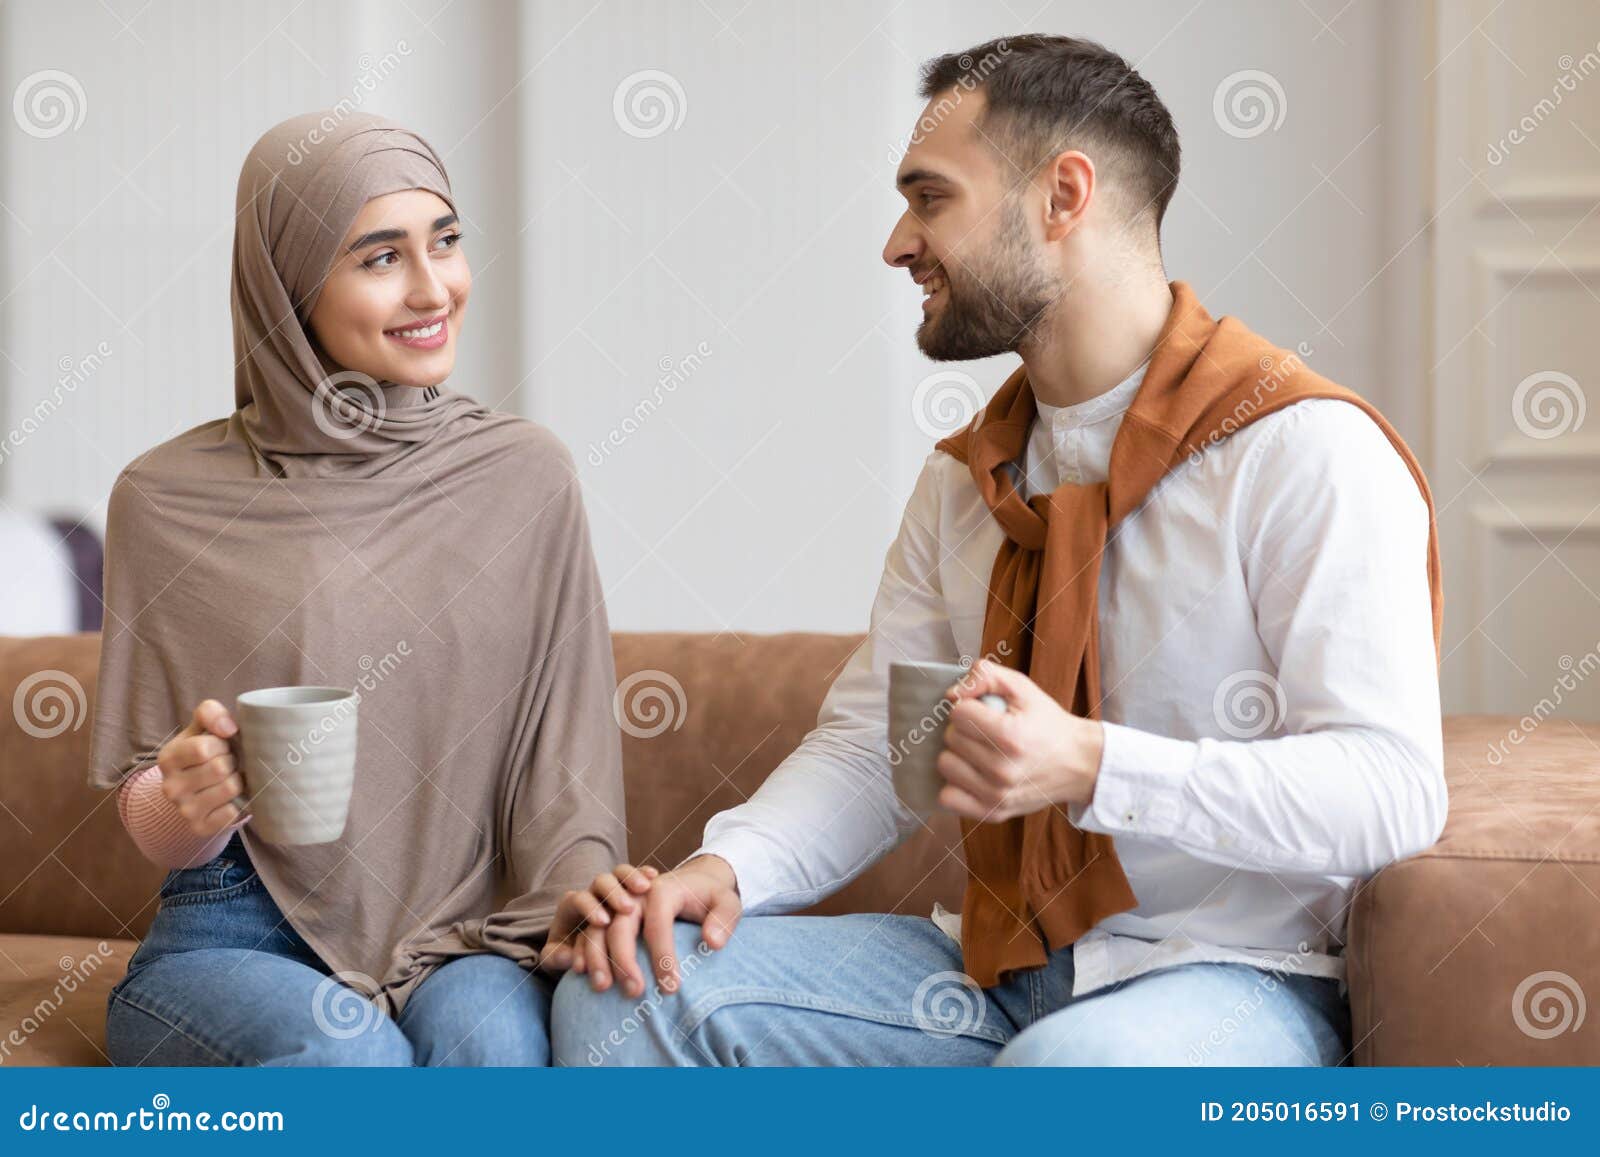 Young Muslim Couple Talking and Flirting Drinking Coffee at Home ...